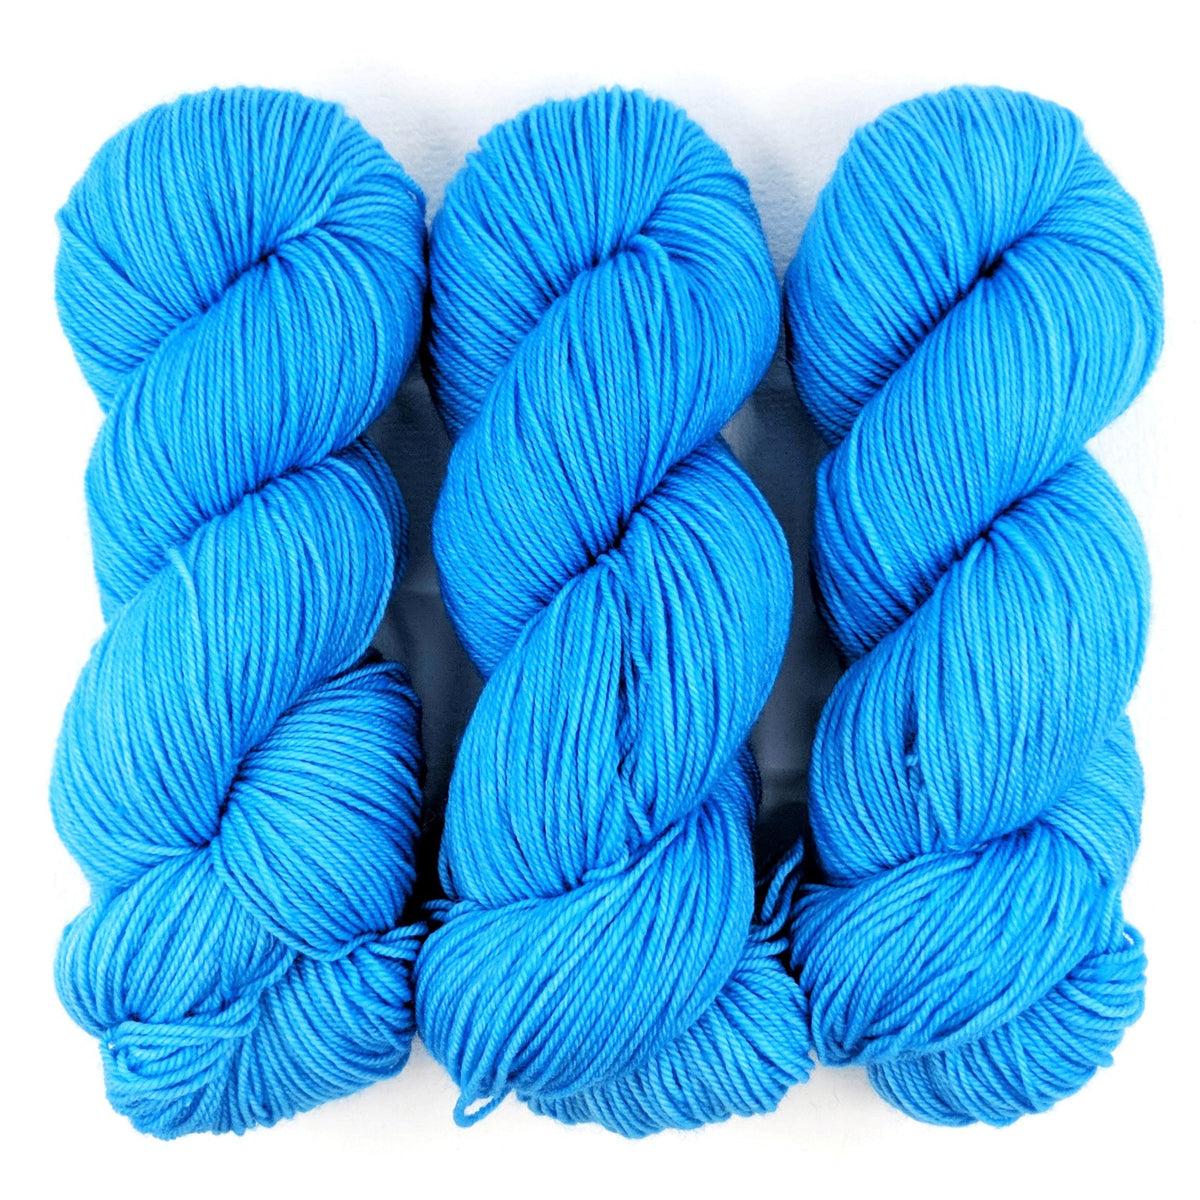 Nothing But Blue Skies - Merino DK / Light Worsted - Dyed Stock